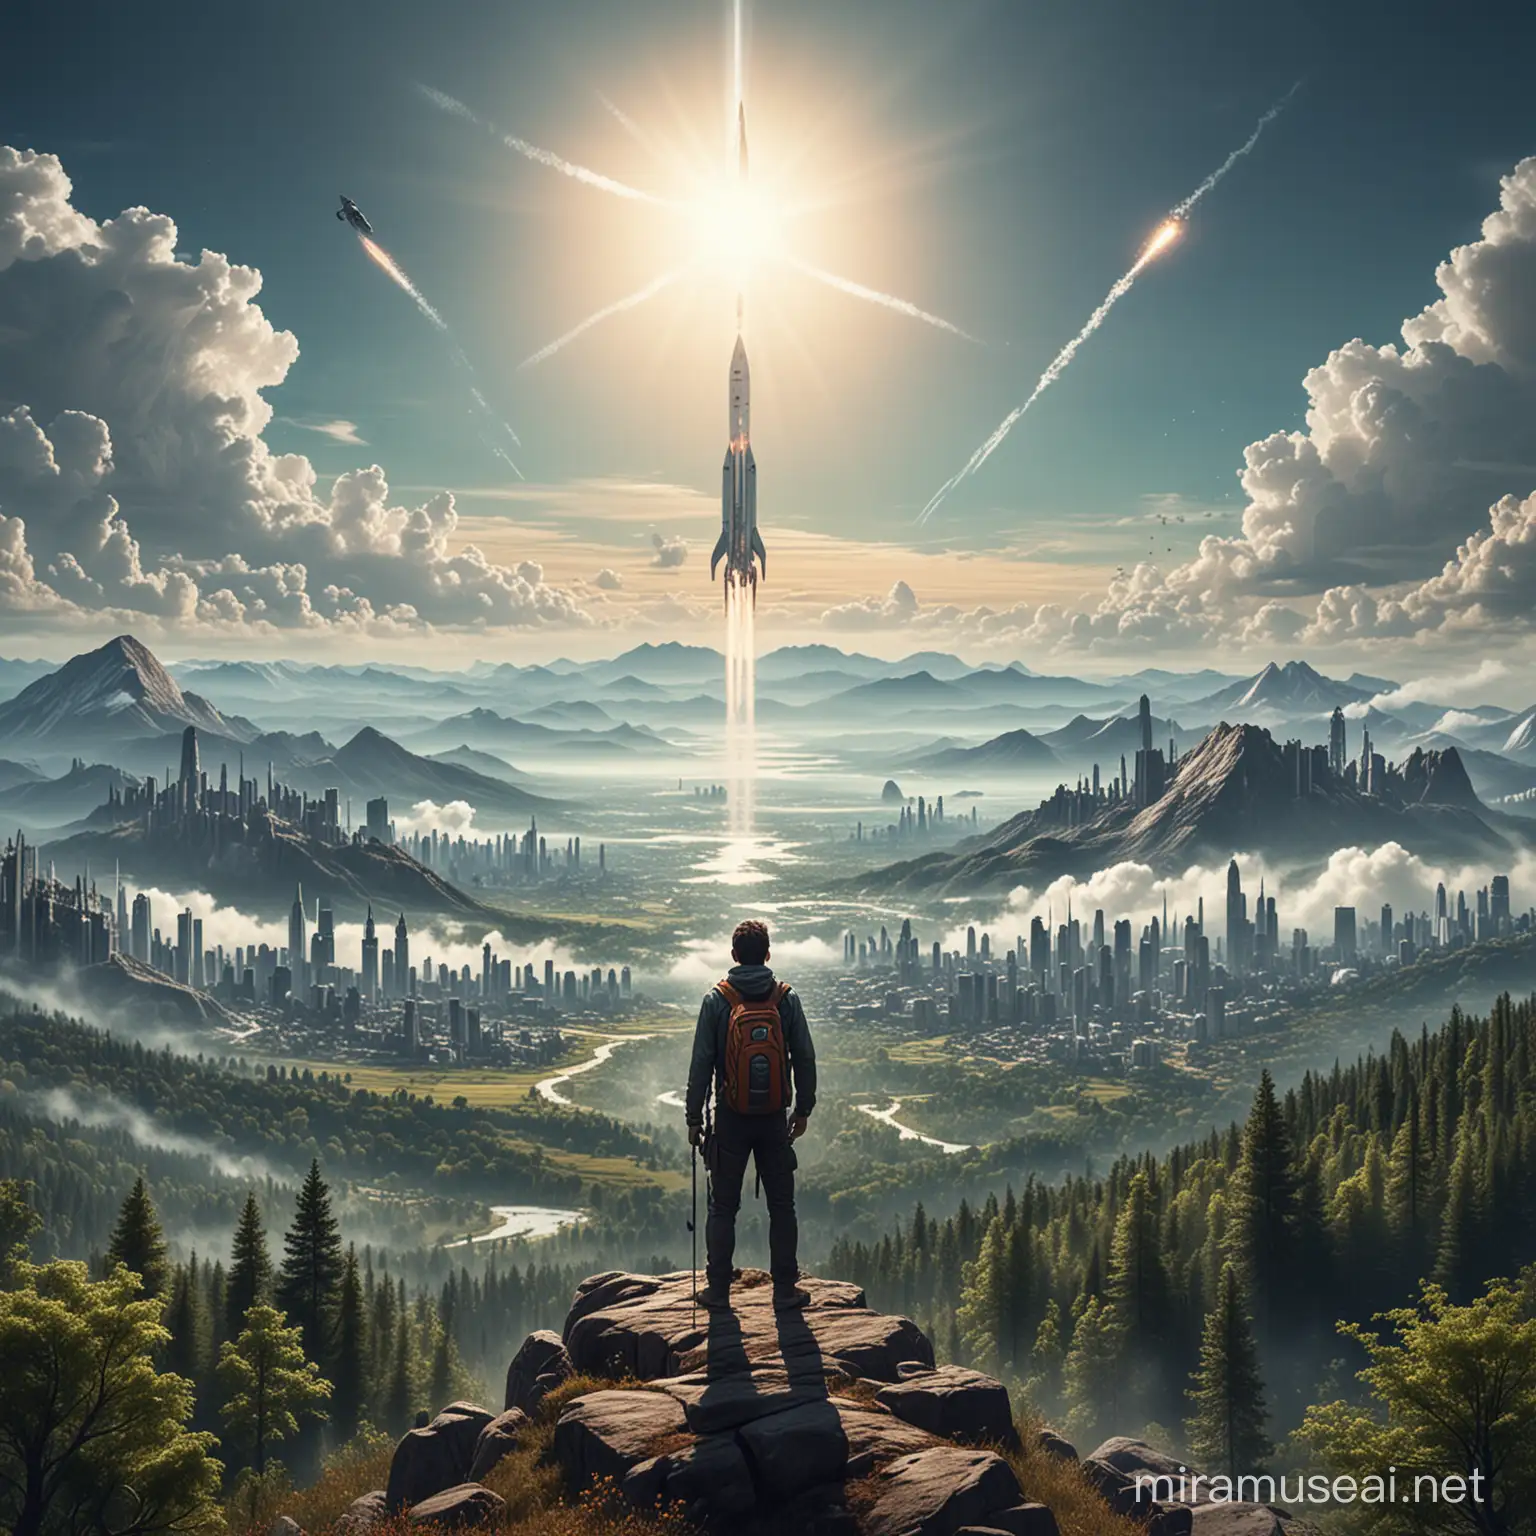 a man staring into a future world in the forest free from work with mountain in the background mixed with city skyline and rockets going to space and he is hiking and its a very sunny day and in the distance you can see a city
